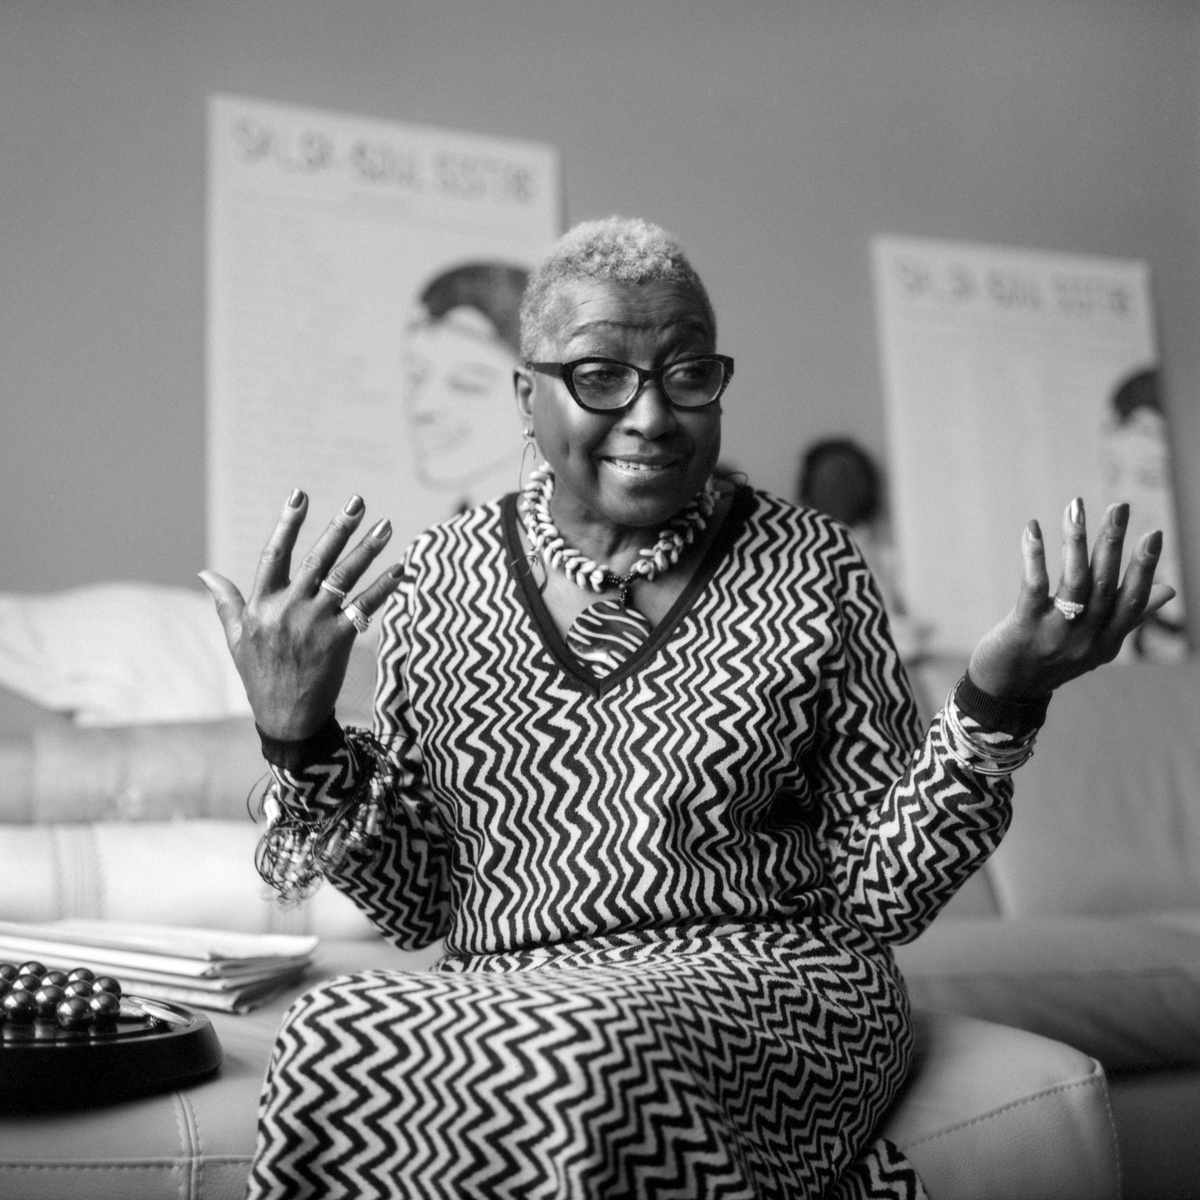 This is a portrait of Cassandra Grant. She's an older Black woman with short hair and glasses. She's wearing a long-sleeve patterned dress and smiling. 